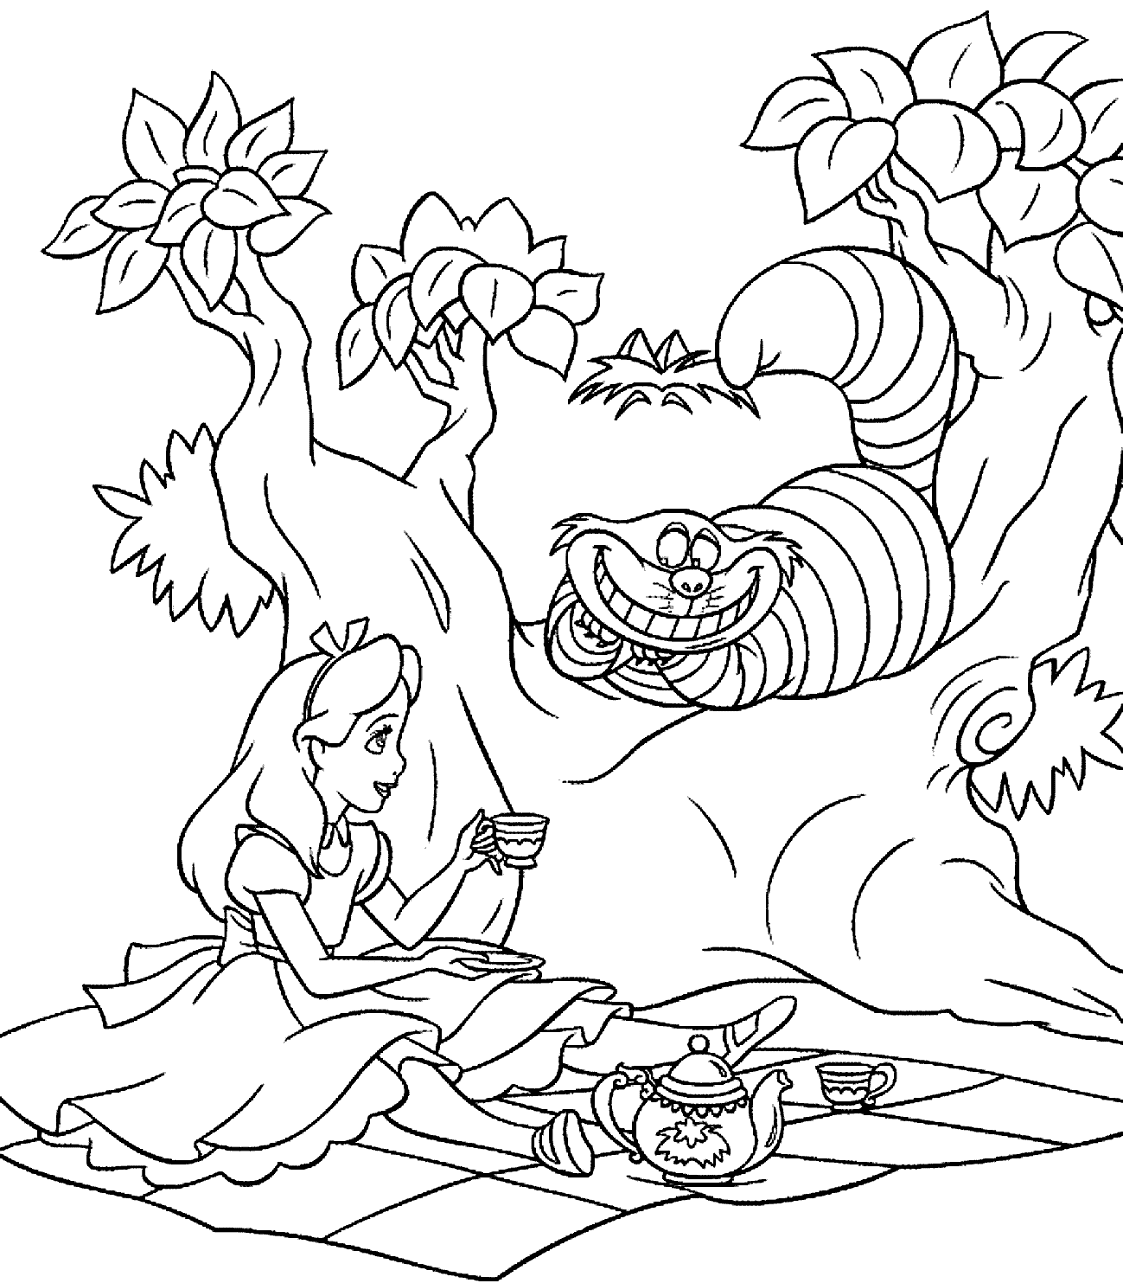 Alice and Cheshire Cat Coloring Page